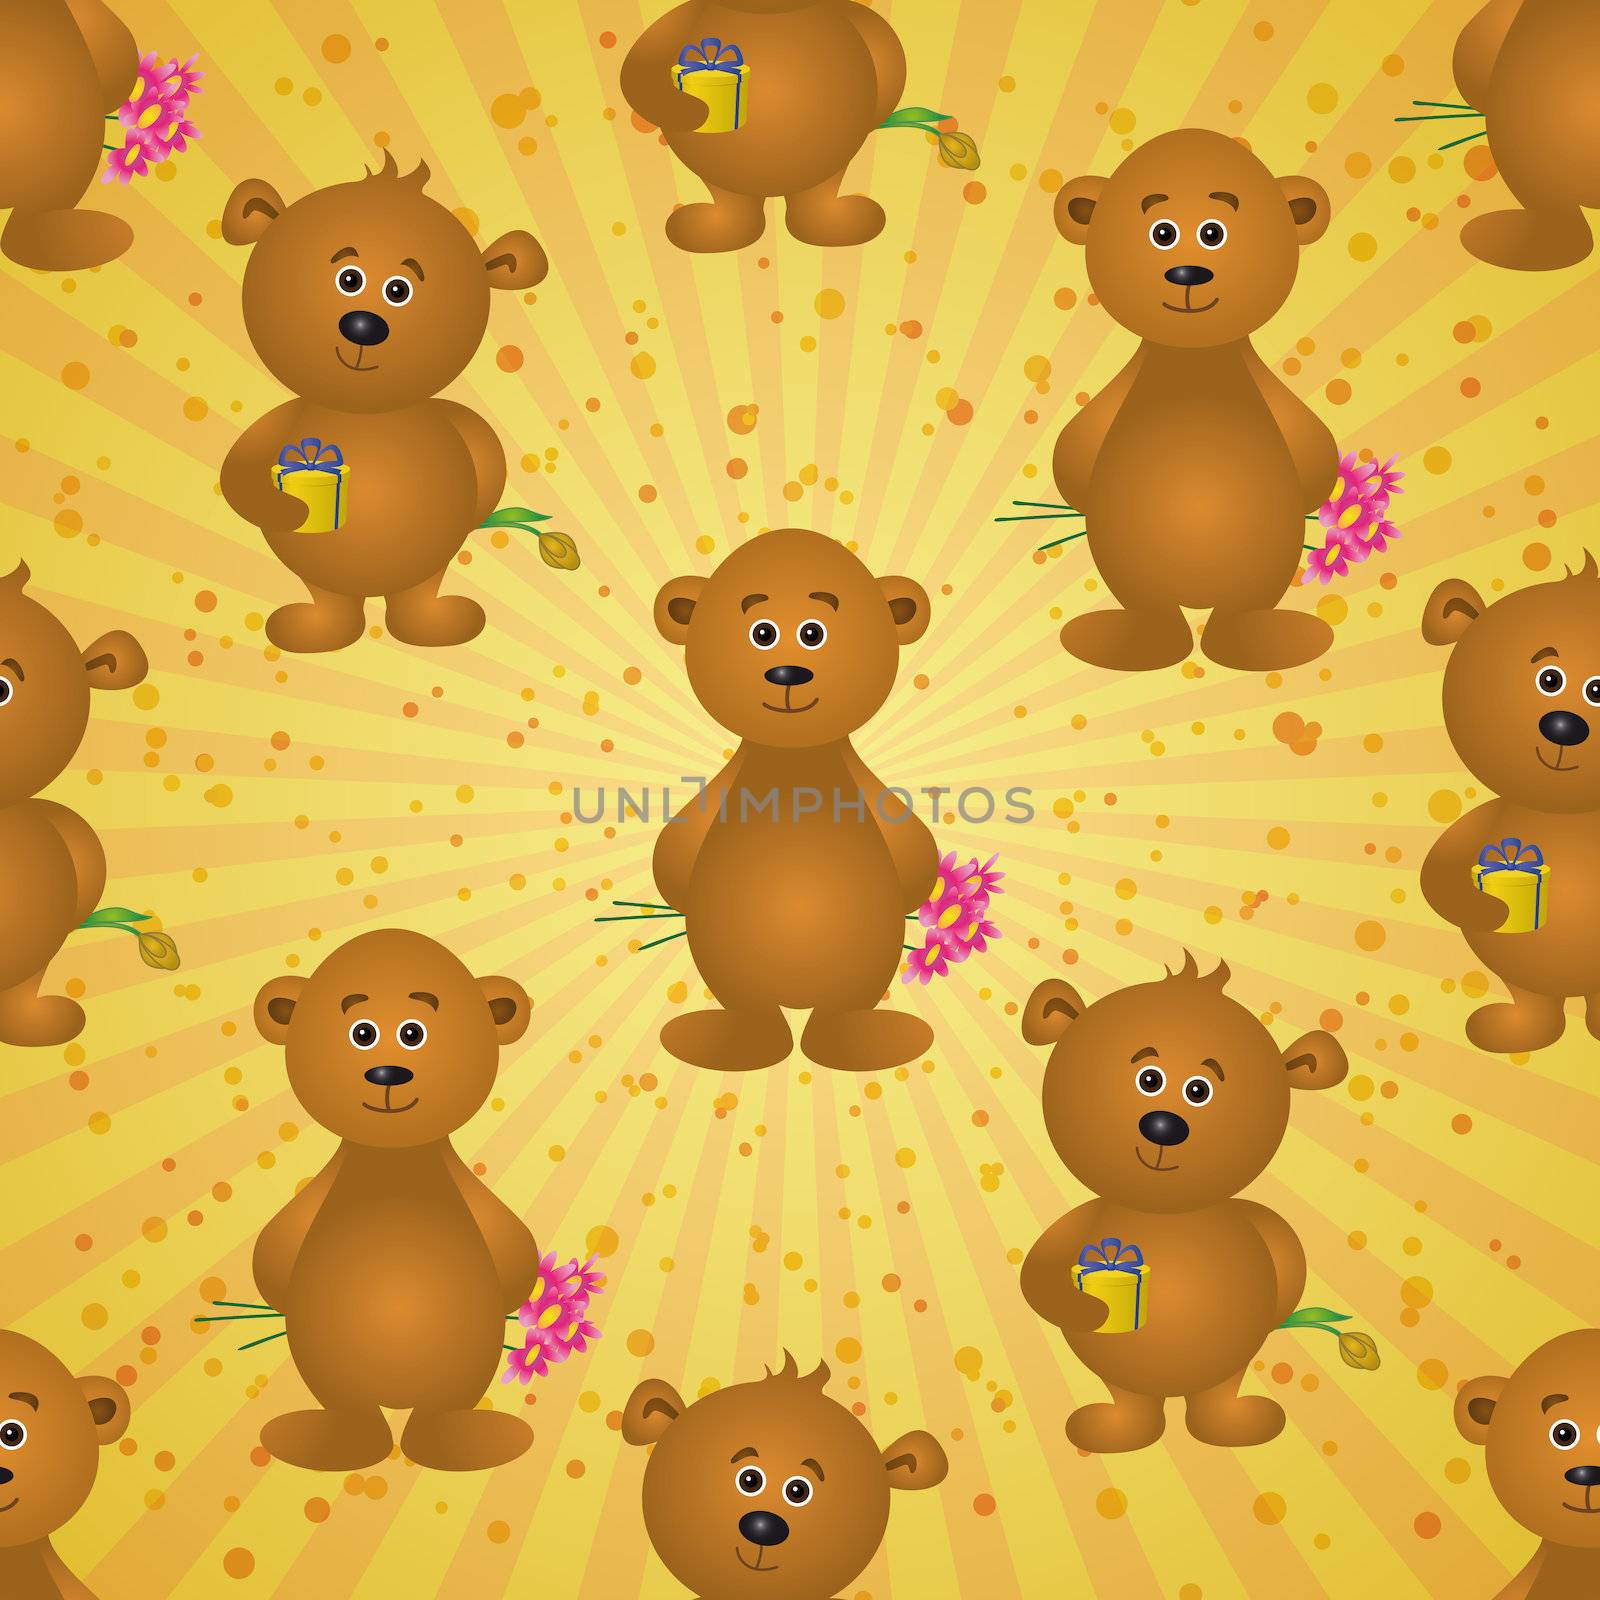 Seamless pattern, cartoon teddy bears with holiday gift boxes and flowers on abstract background. , contains transparencies.